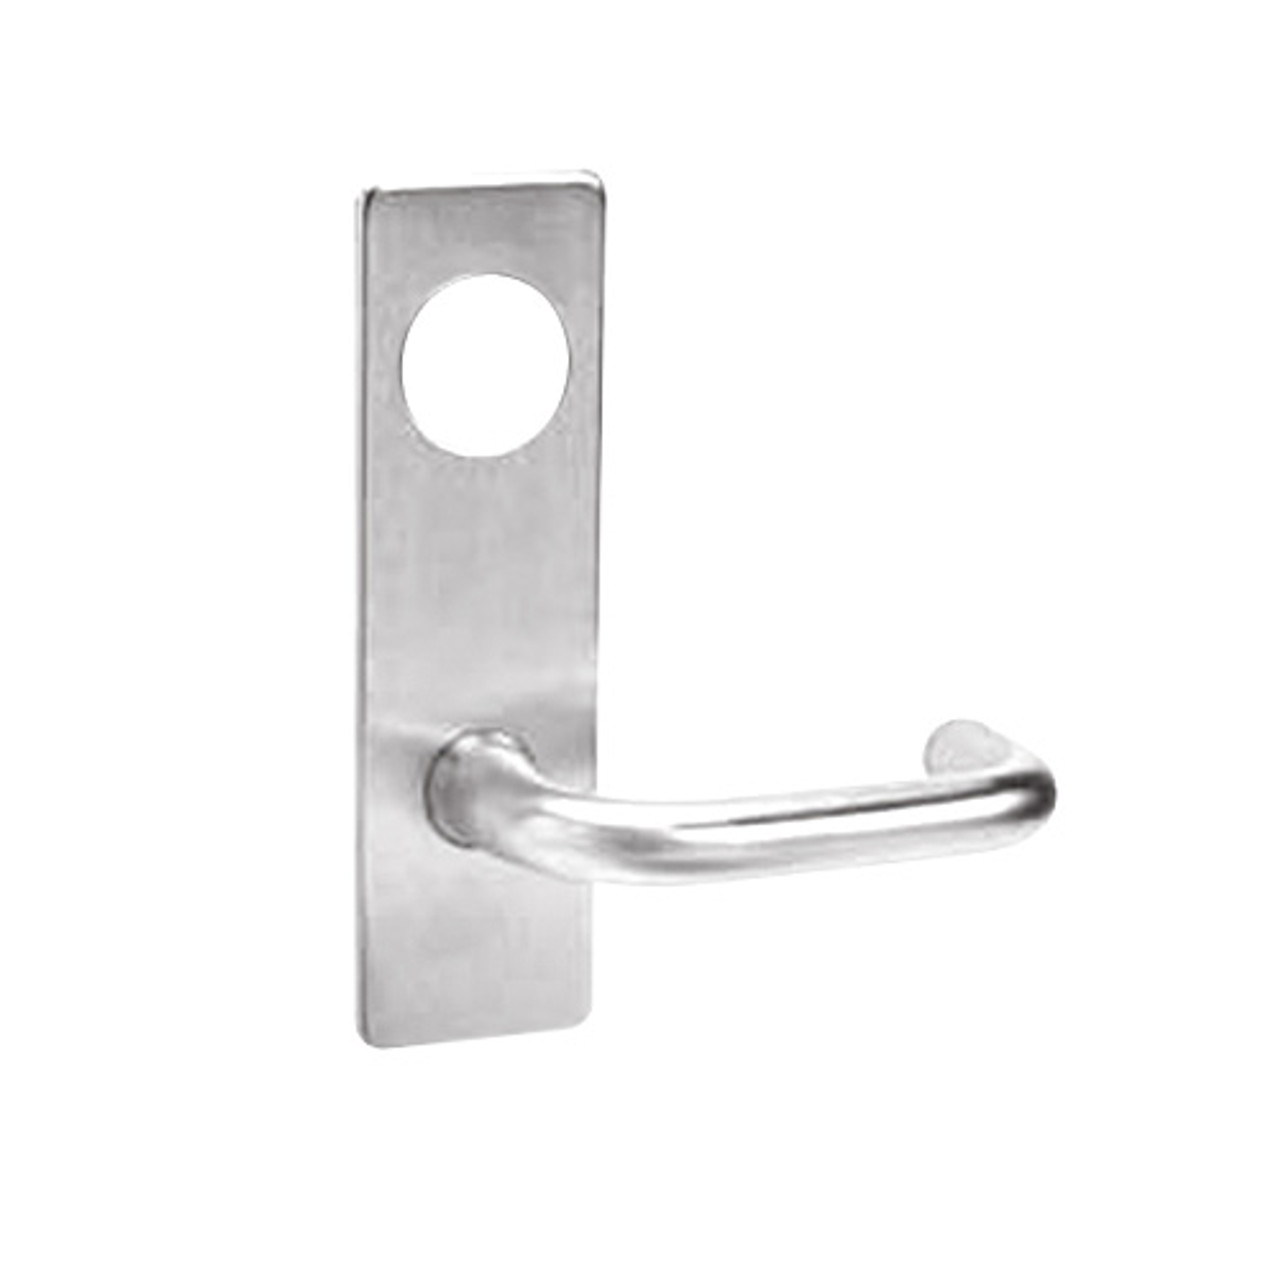 ML2059-LWN-629-LC Corbin Russwin ML2000 Series Mortise Security Storeroom Locksets with Lustra Lever in Bright Stainless Steel